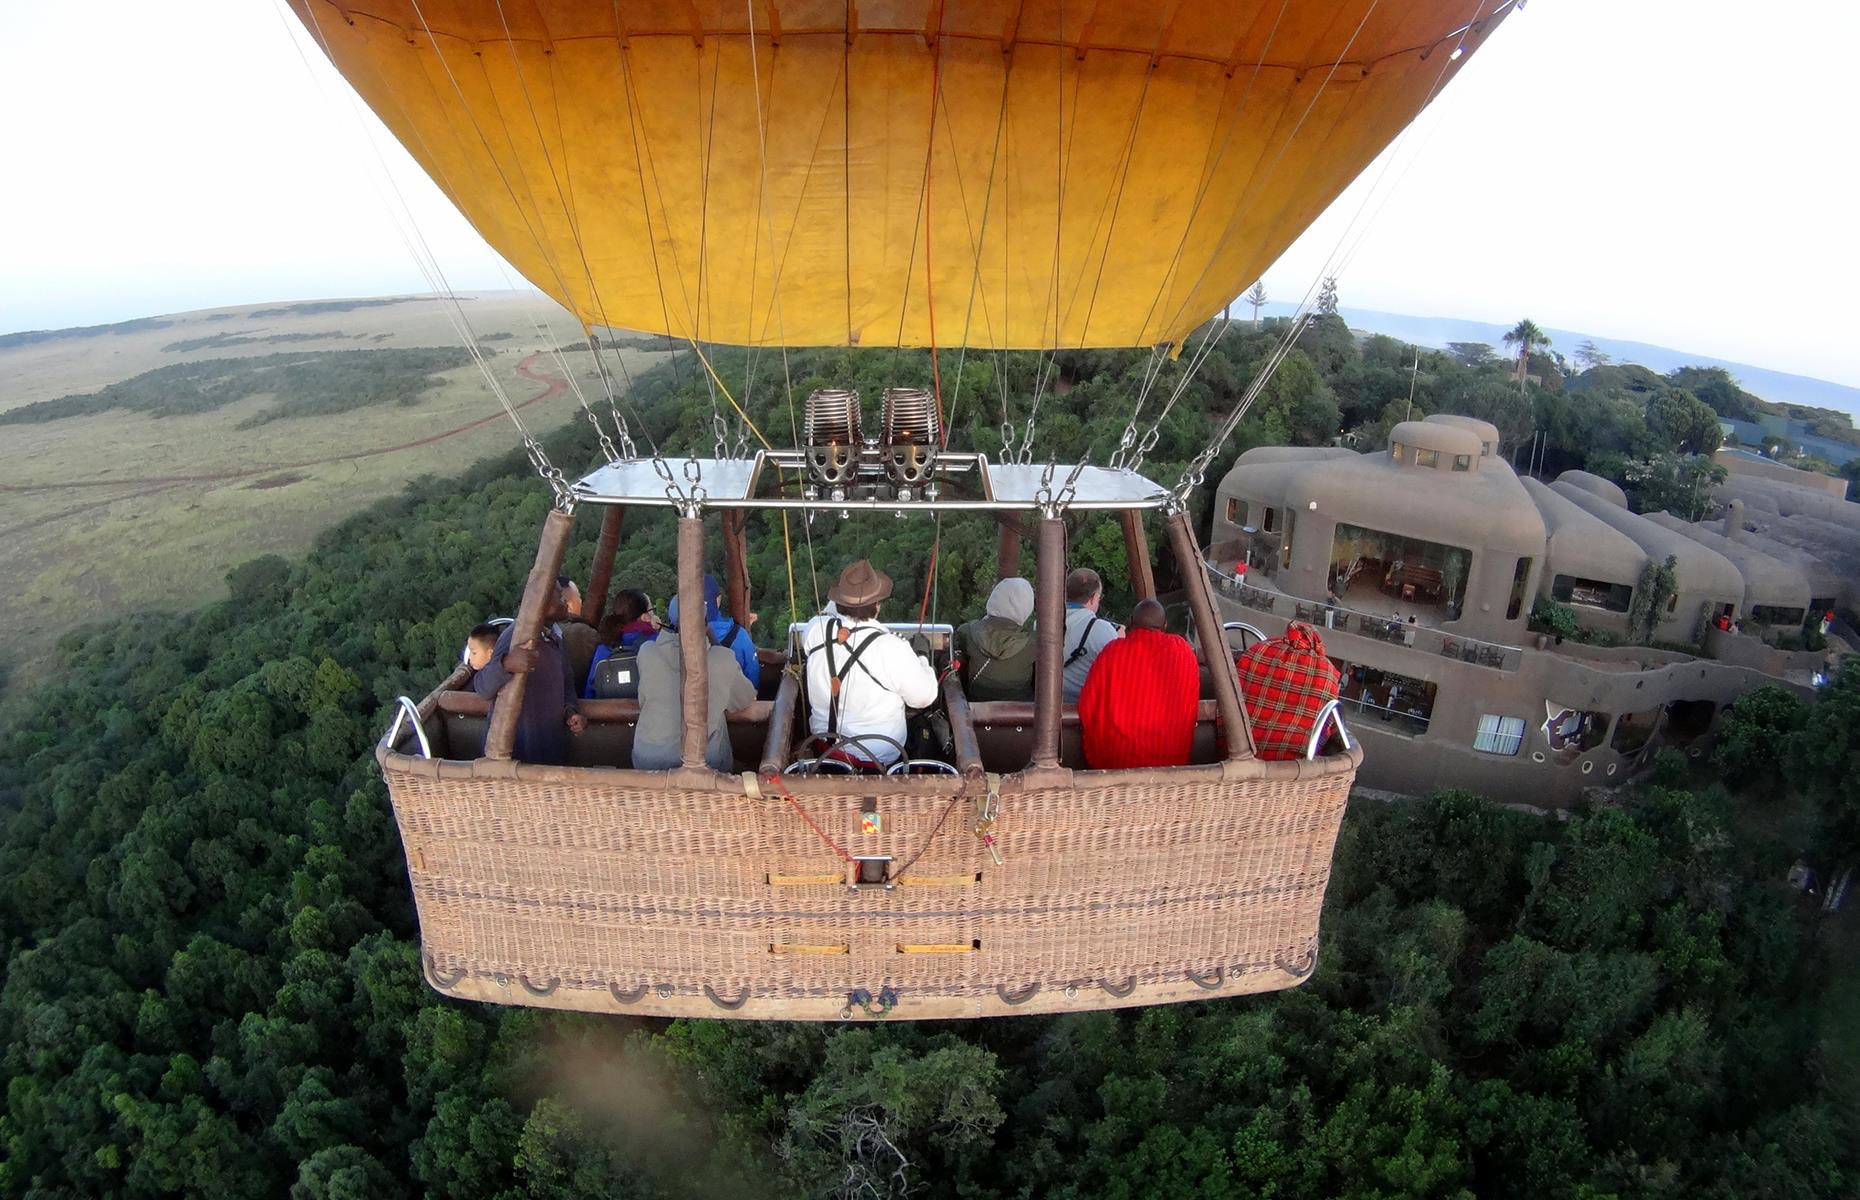 <p>There can be no better way to see the spectacular Maasai Mara than from above and certainly no more peaceful way than to float across the African plains in a hot air balloon. With this excursion by <a href="https://www.serenahotels.com/mara/experiences/balloon-safari">Serena Hotels</a>, you can spot giraffes, zebra, wildebeest and more from the skies. You might even spot a stalking cheetah or a leopard in a tall tree. Come between July and October, though, and you'll be spoiled with an aerial view of the great wildebeest migration, when thousands of the animals trek in huge herds across the plains.</p>